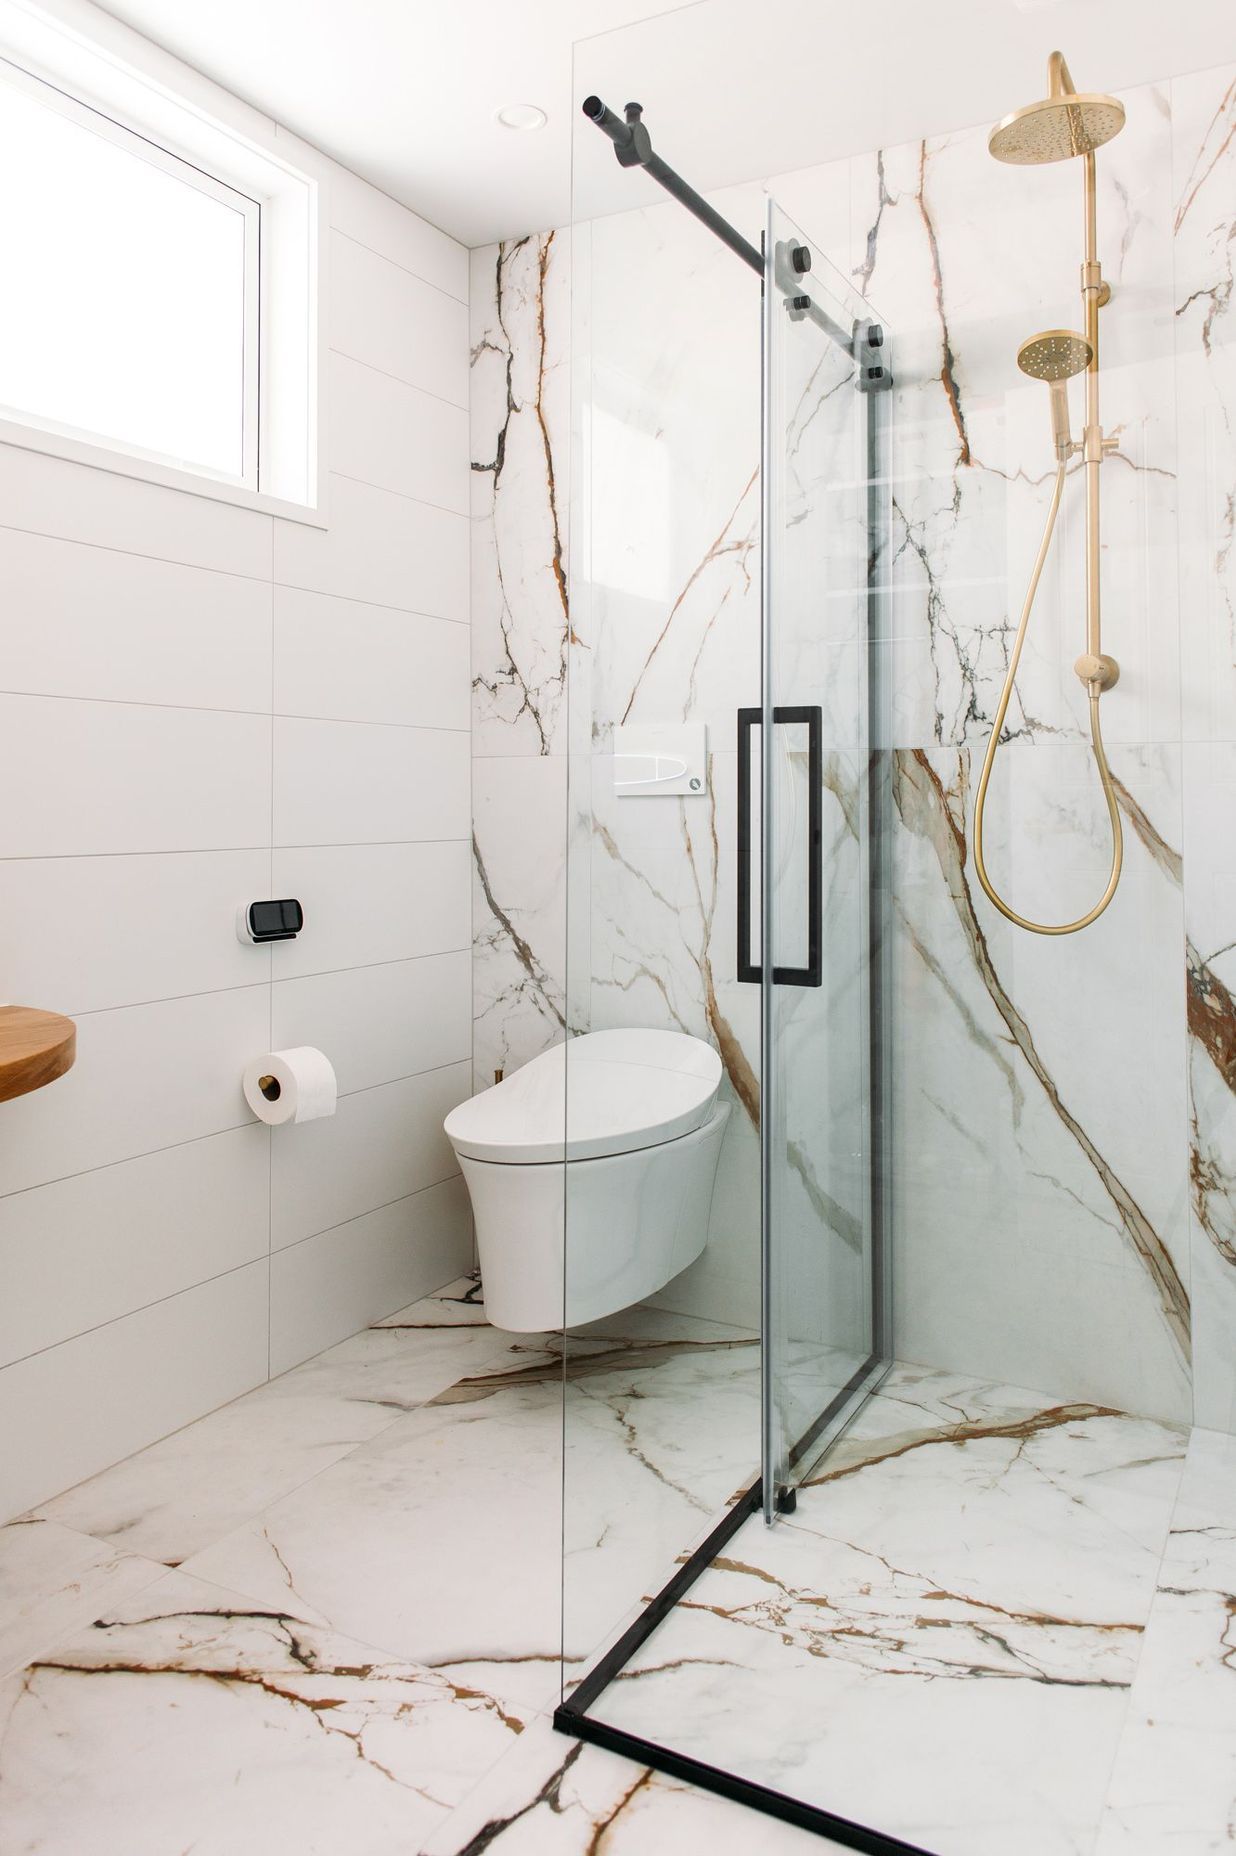 A wall hung smart toilet fit the brief in this tiled bathroom.